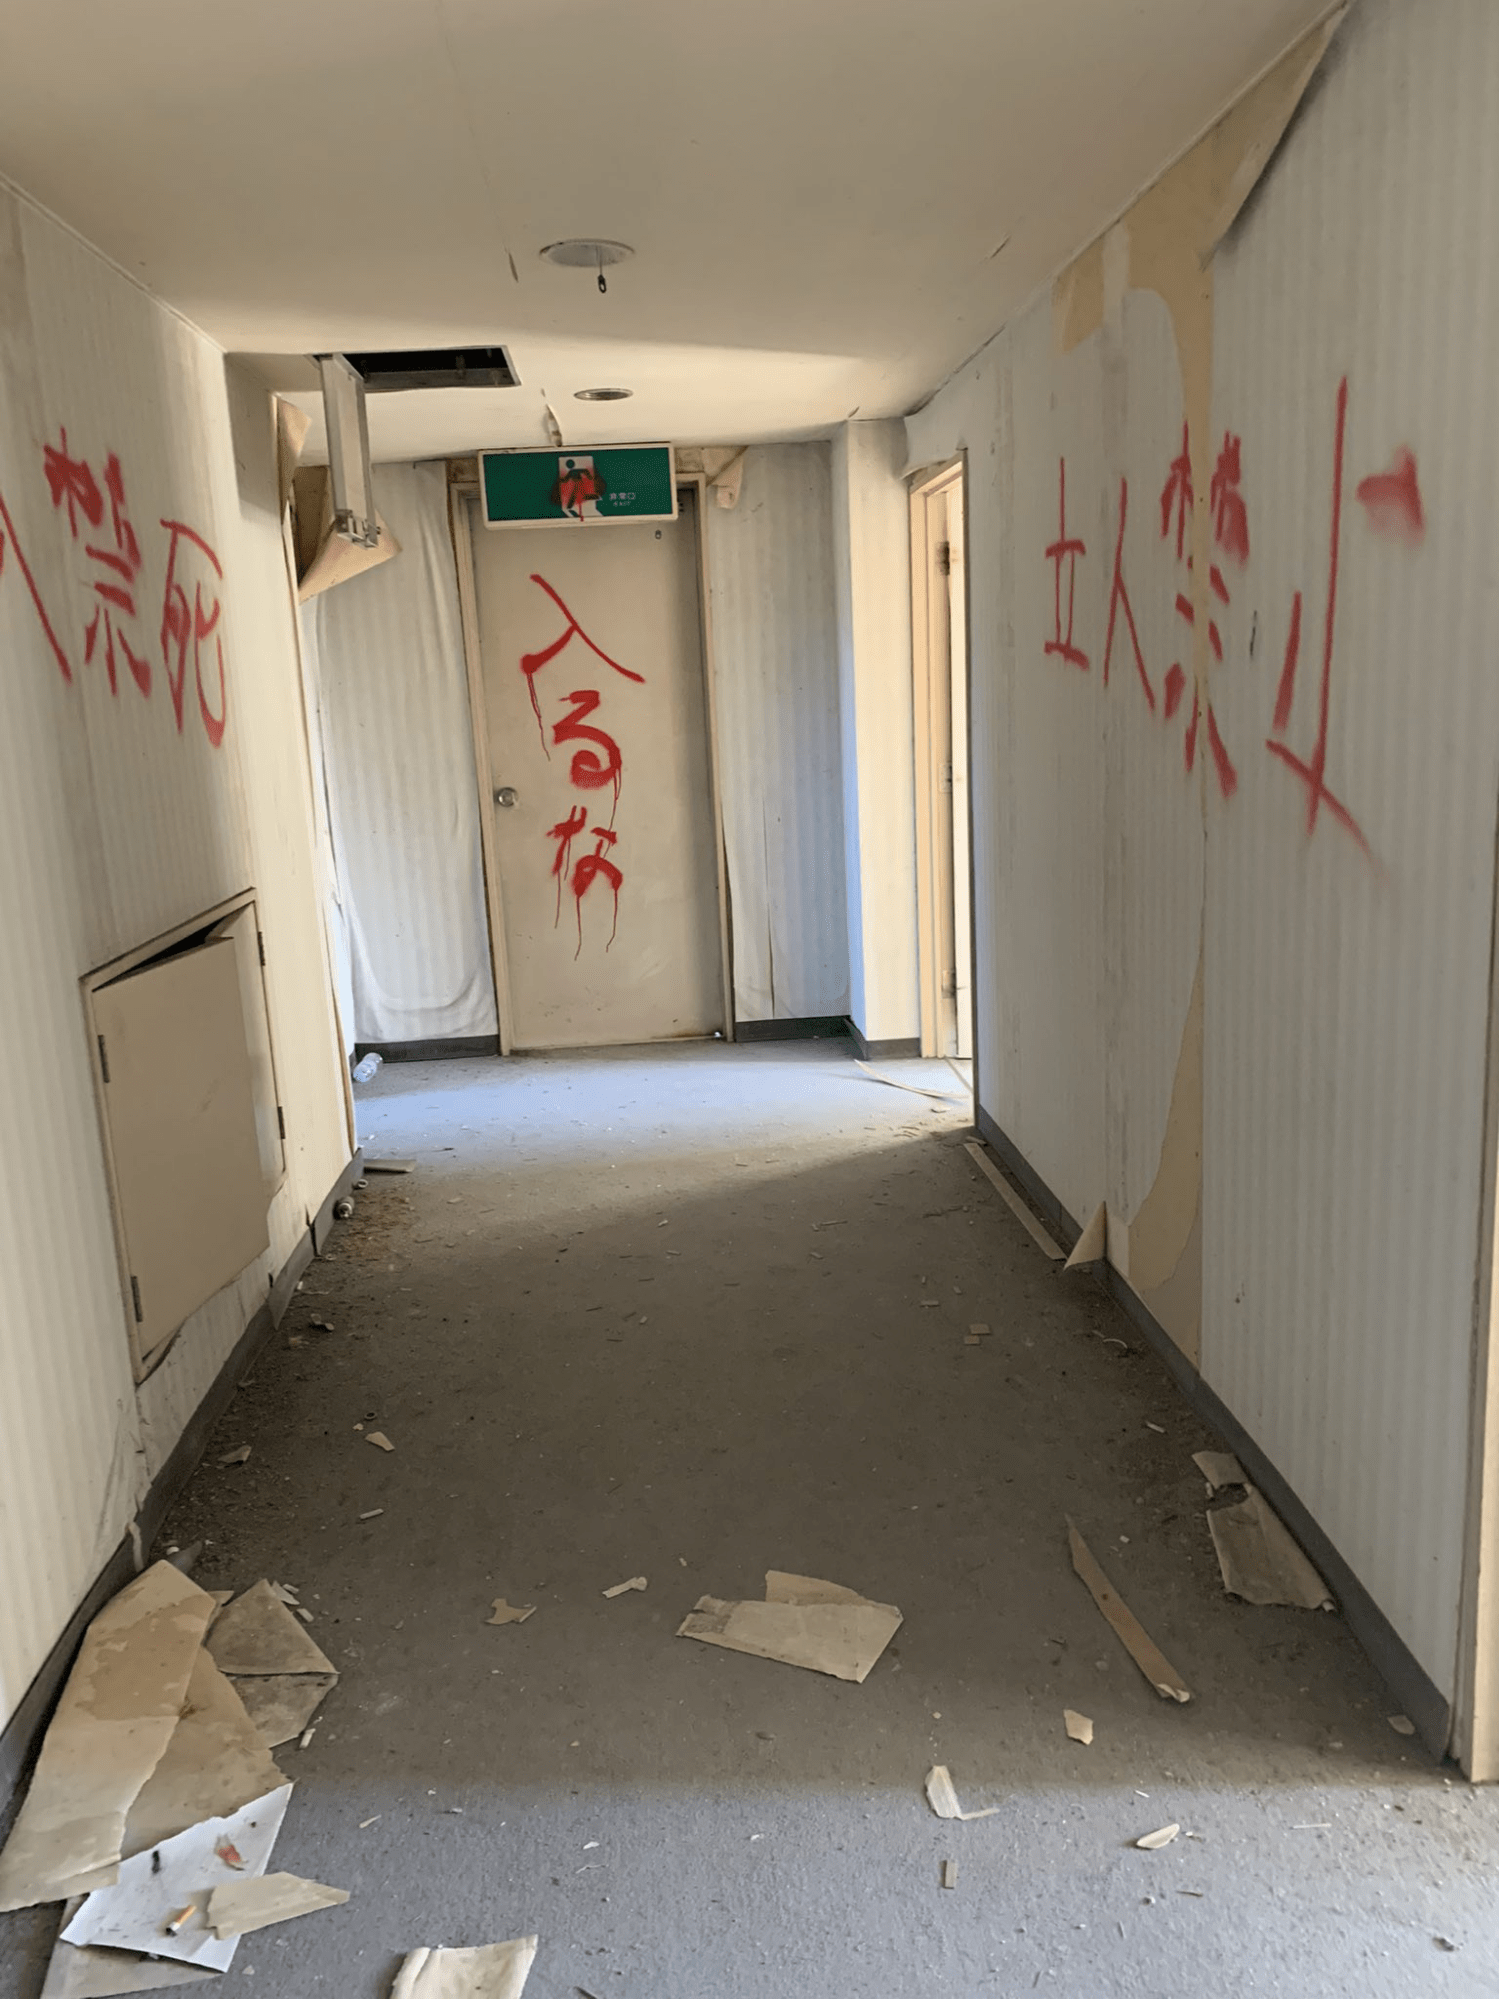 Abandoned places in Japan - threatening messages spray painted onto the walls of Green Hills Hotel